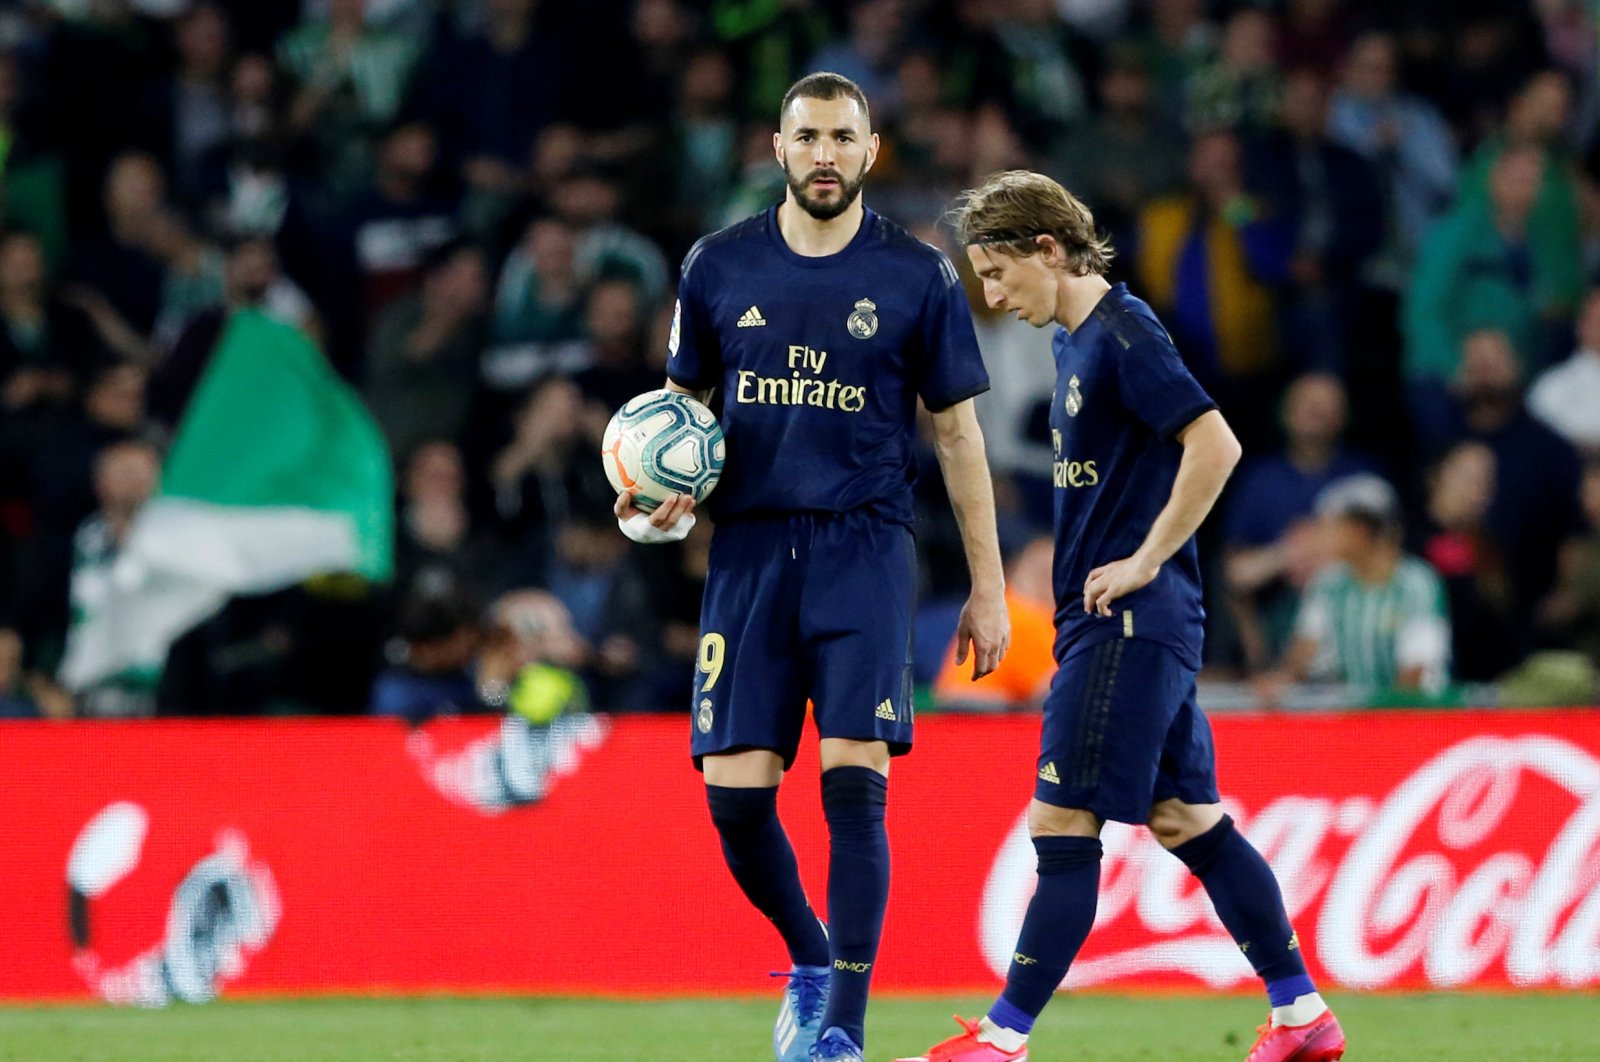 Real Madrid's Karim Benzema and Luka Modric react after Real Betis' first goal during a La Liga match, March 8, 2020. (Reuters Photo)